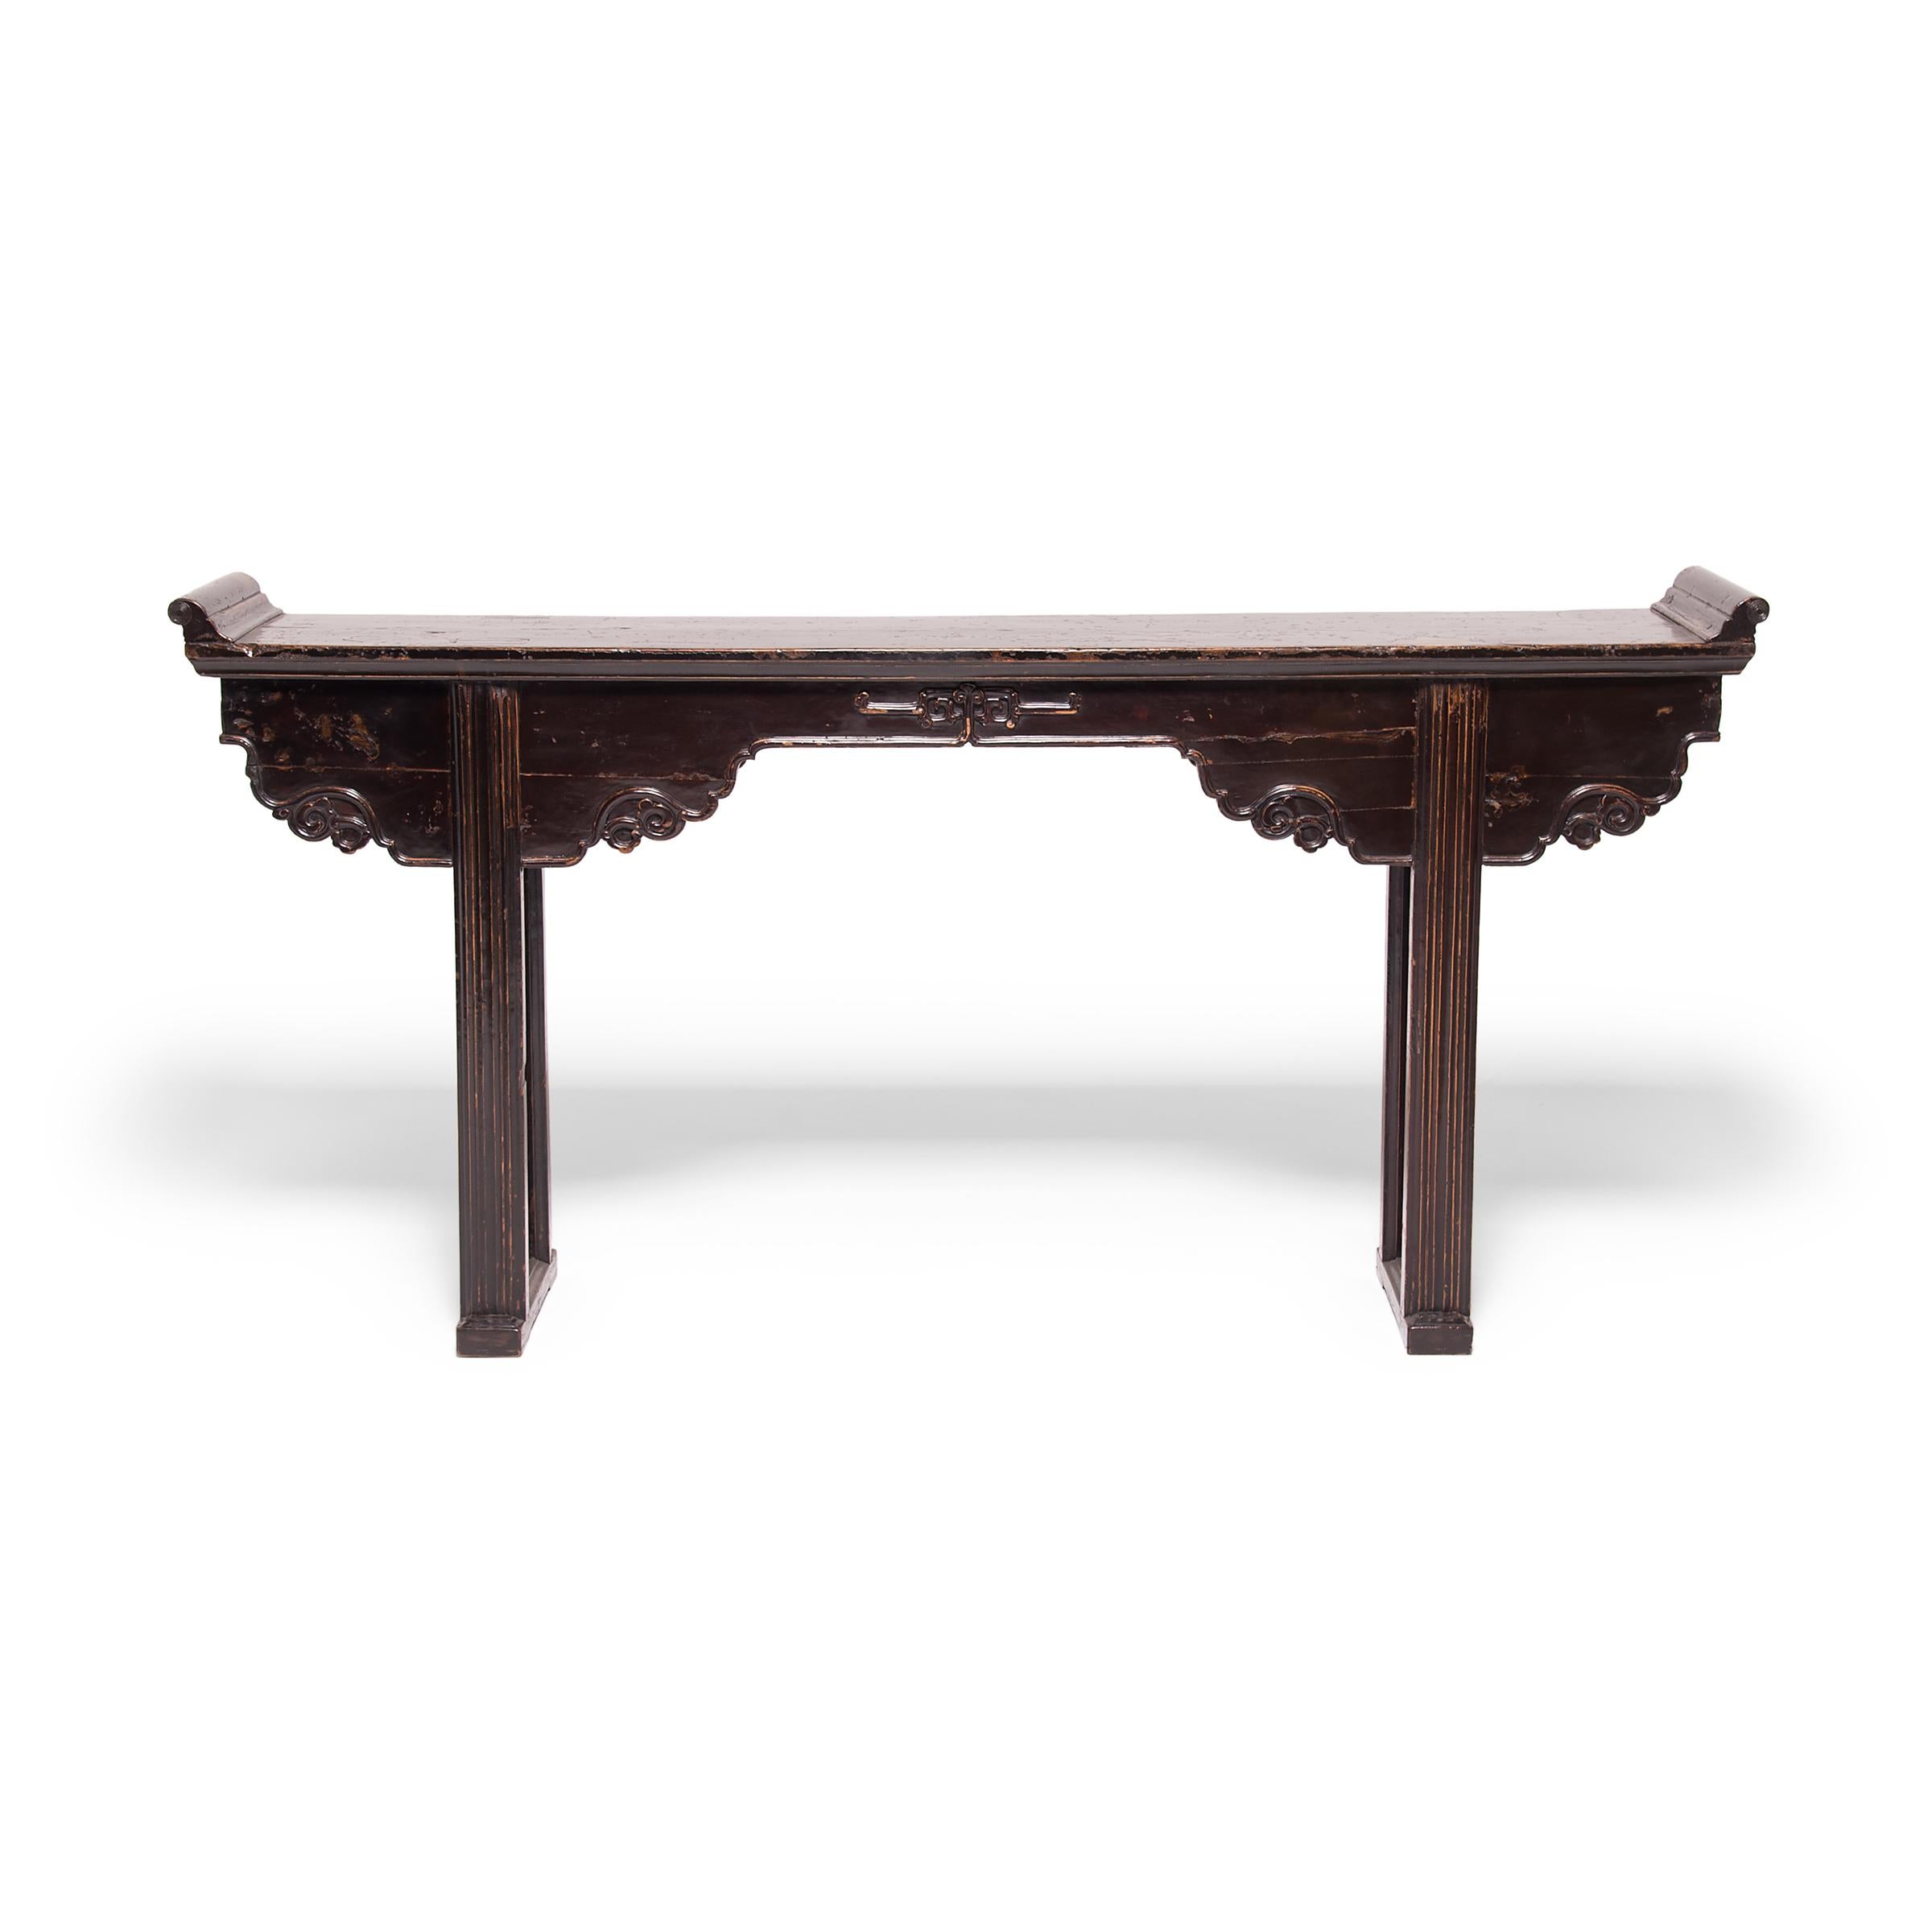 Slender, long tables like this are often referred to as “altar tables.” In ancient China they were used to hold musical instruments or display items of beauty and wealth such as jade, arrangements of flowers, or porcelain vases. This elegant elmwood